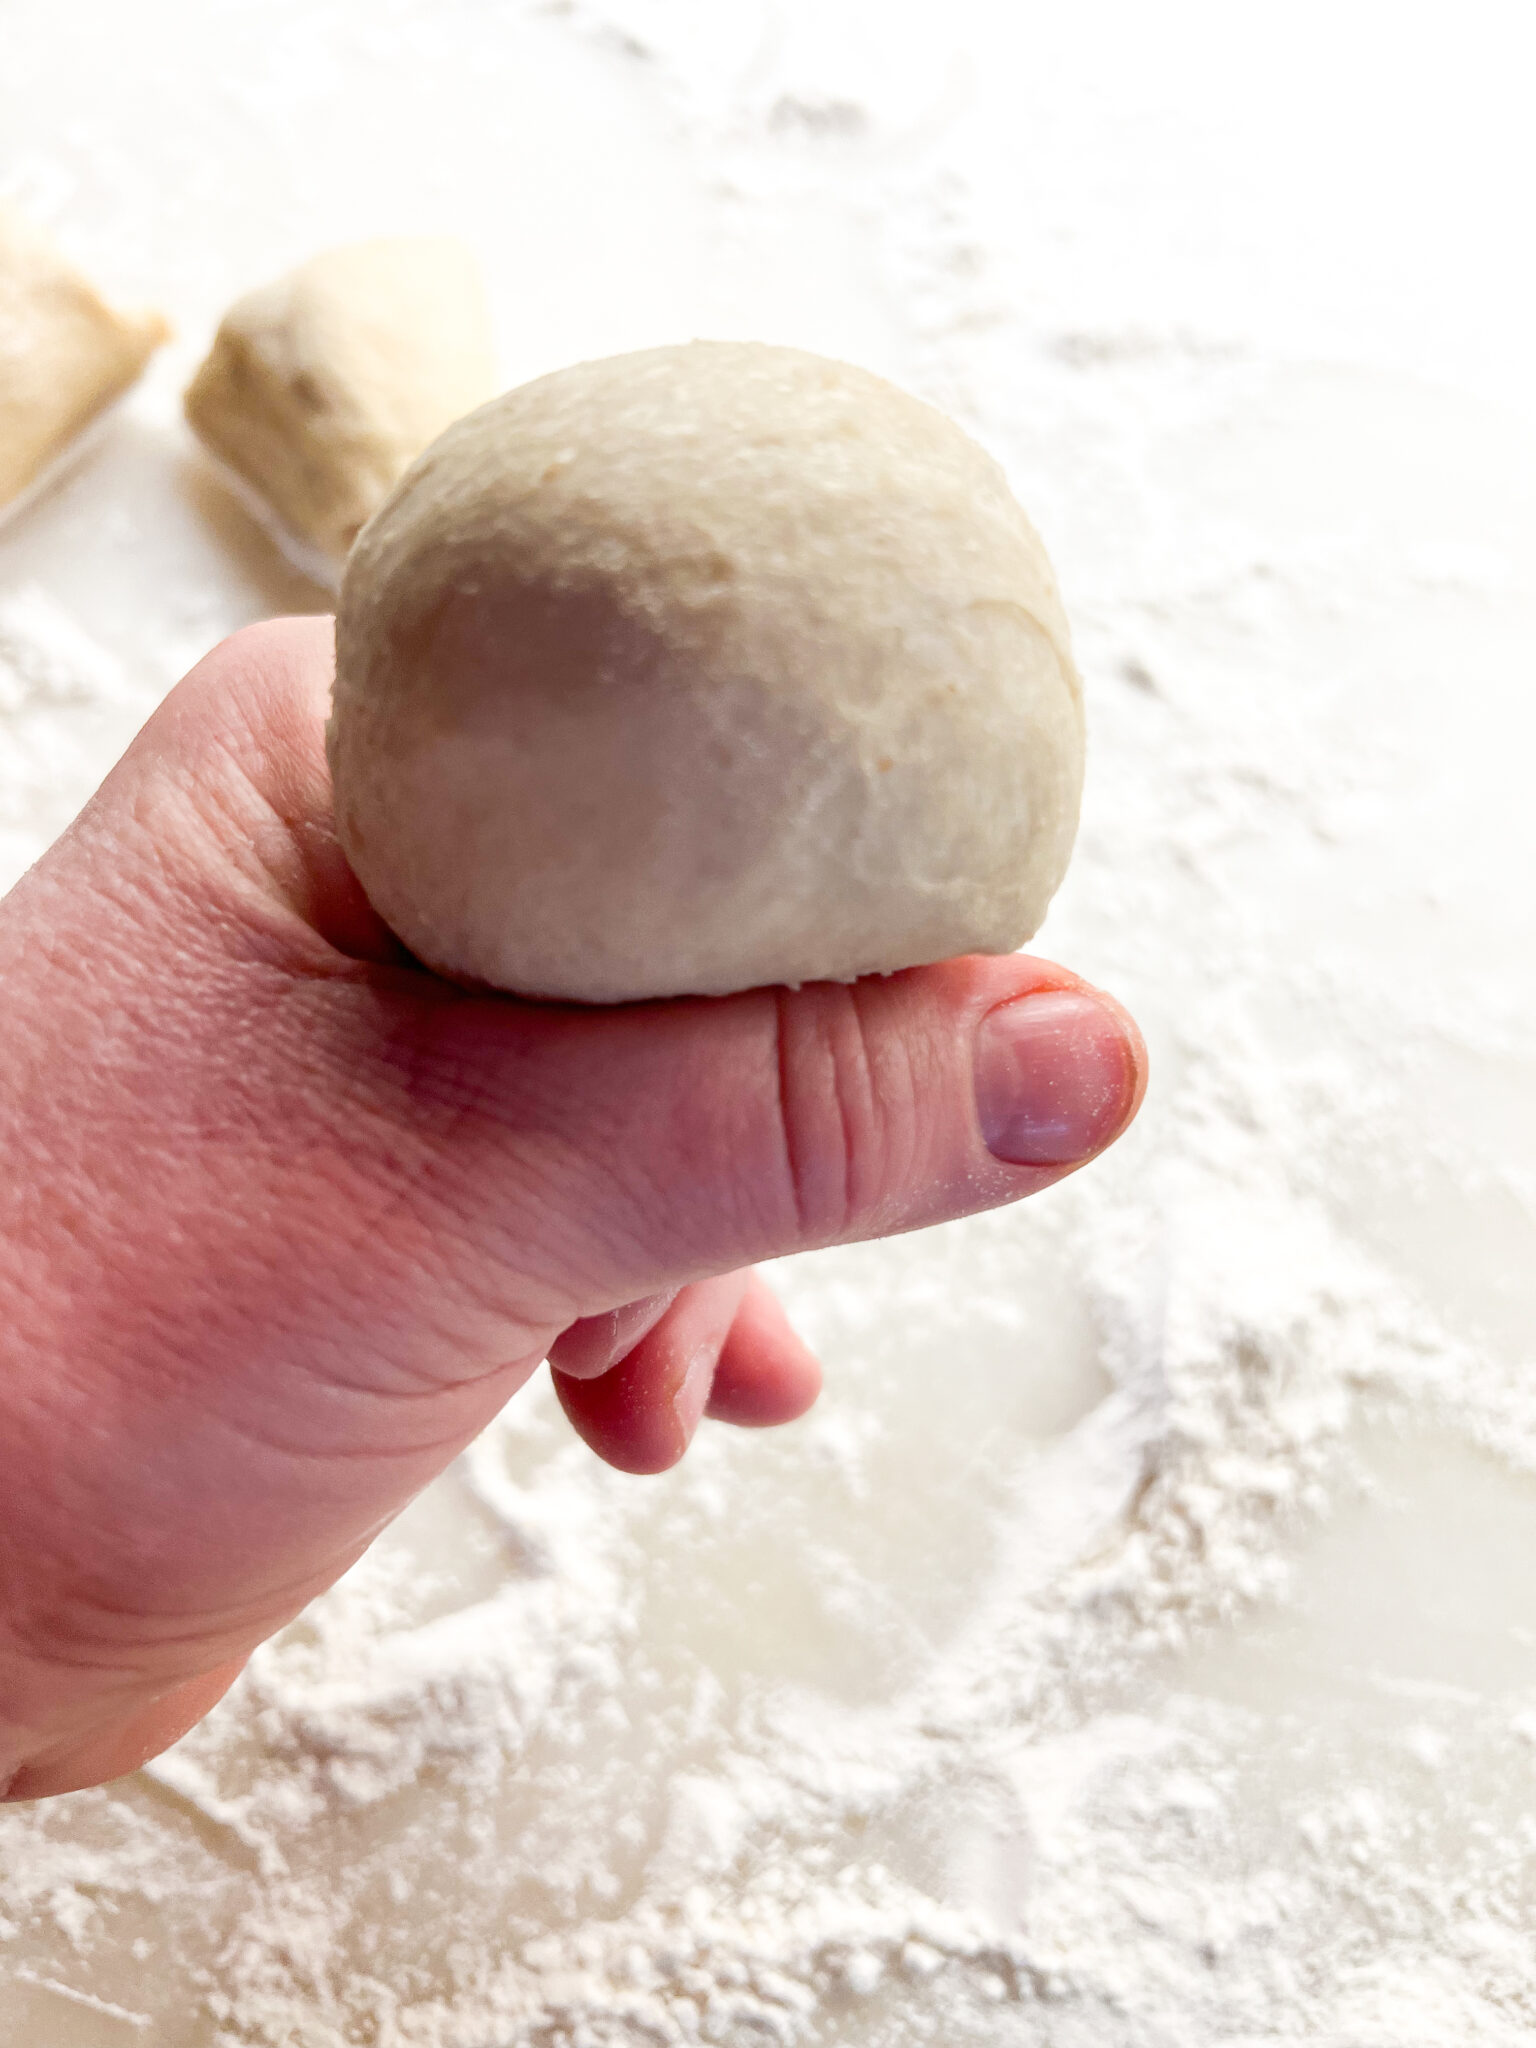 Squeezing the bread dough through the fingers